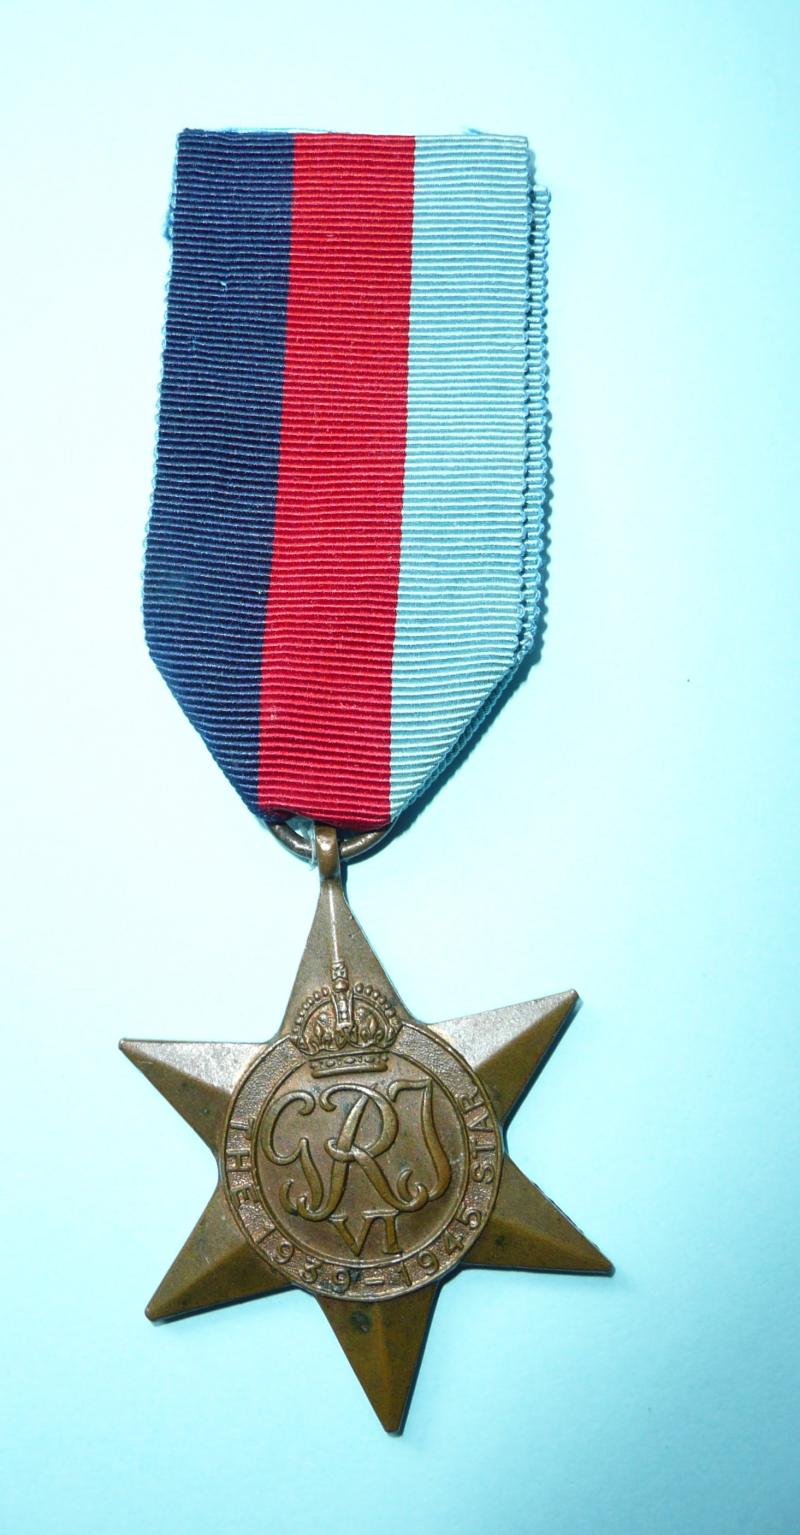 WW2 1939 - 1945 Campaign Star - Named to a 7th Gurkha Rifle Soldier - Recruit